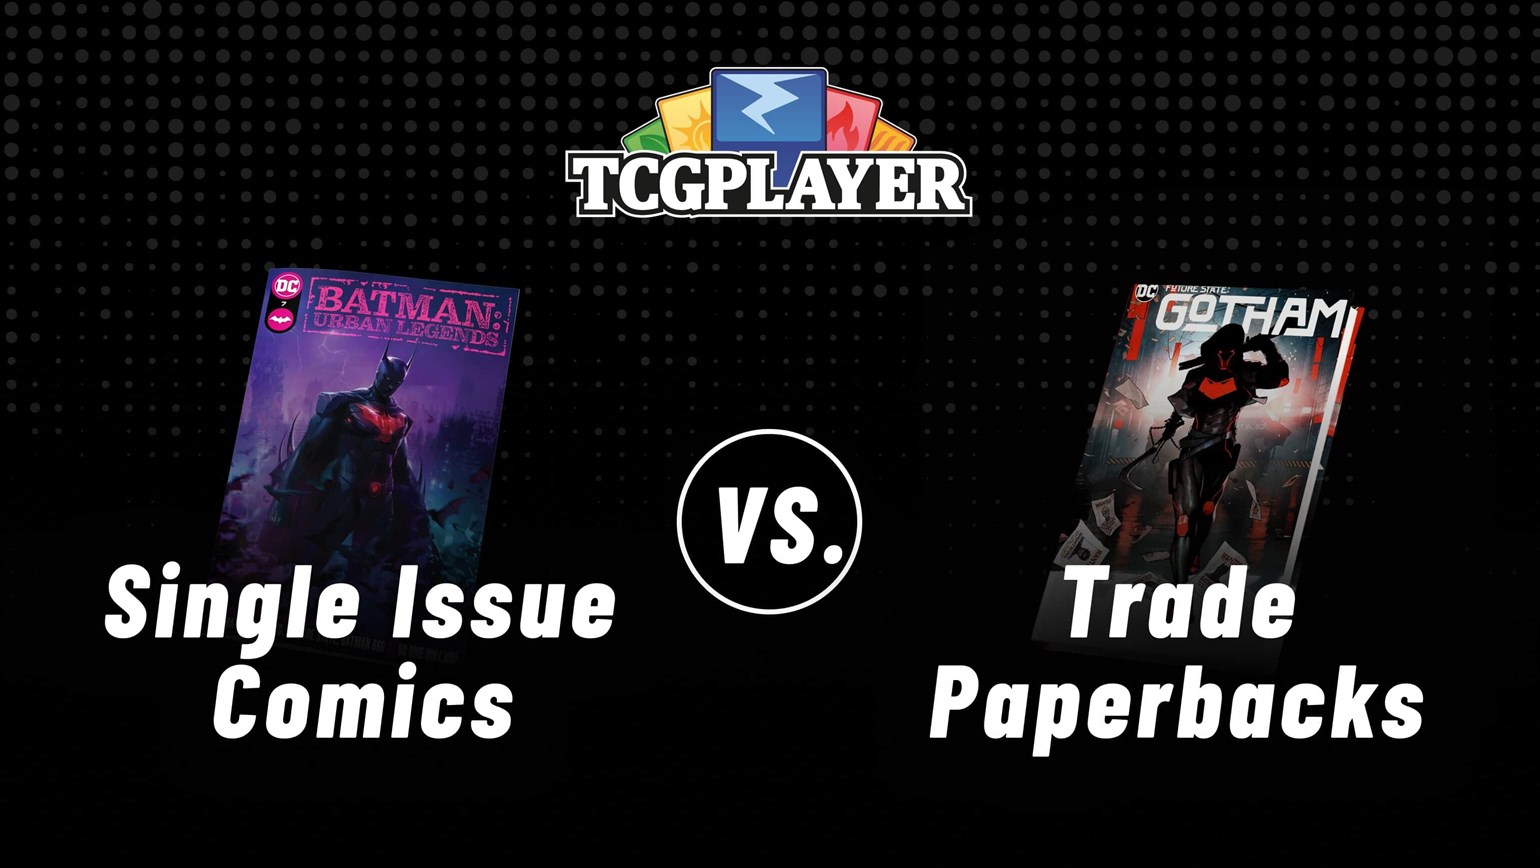 What’s The Difference Between Single Issue Comics and Trade Paperbacks?